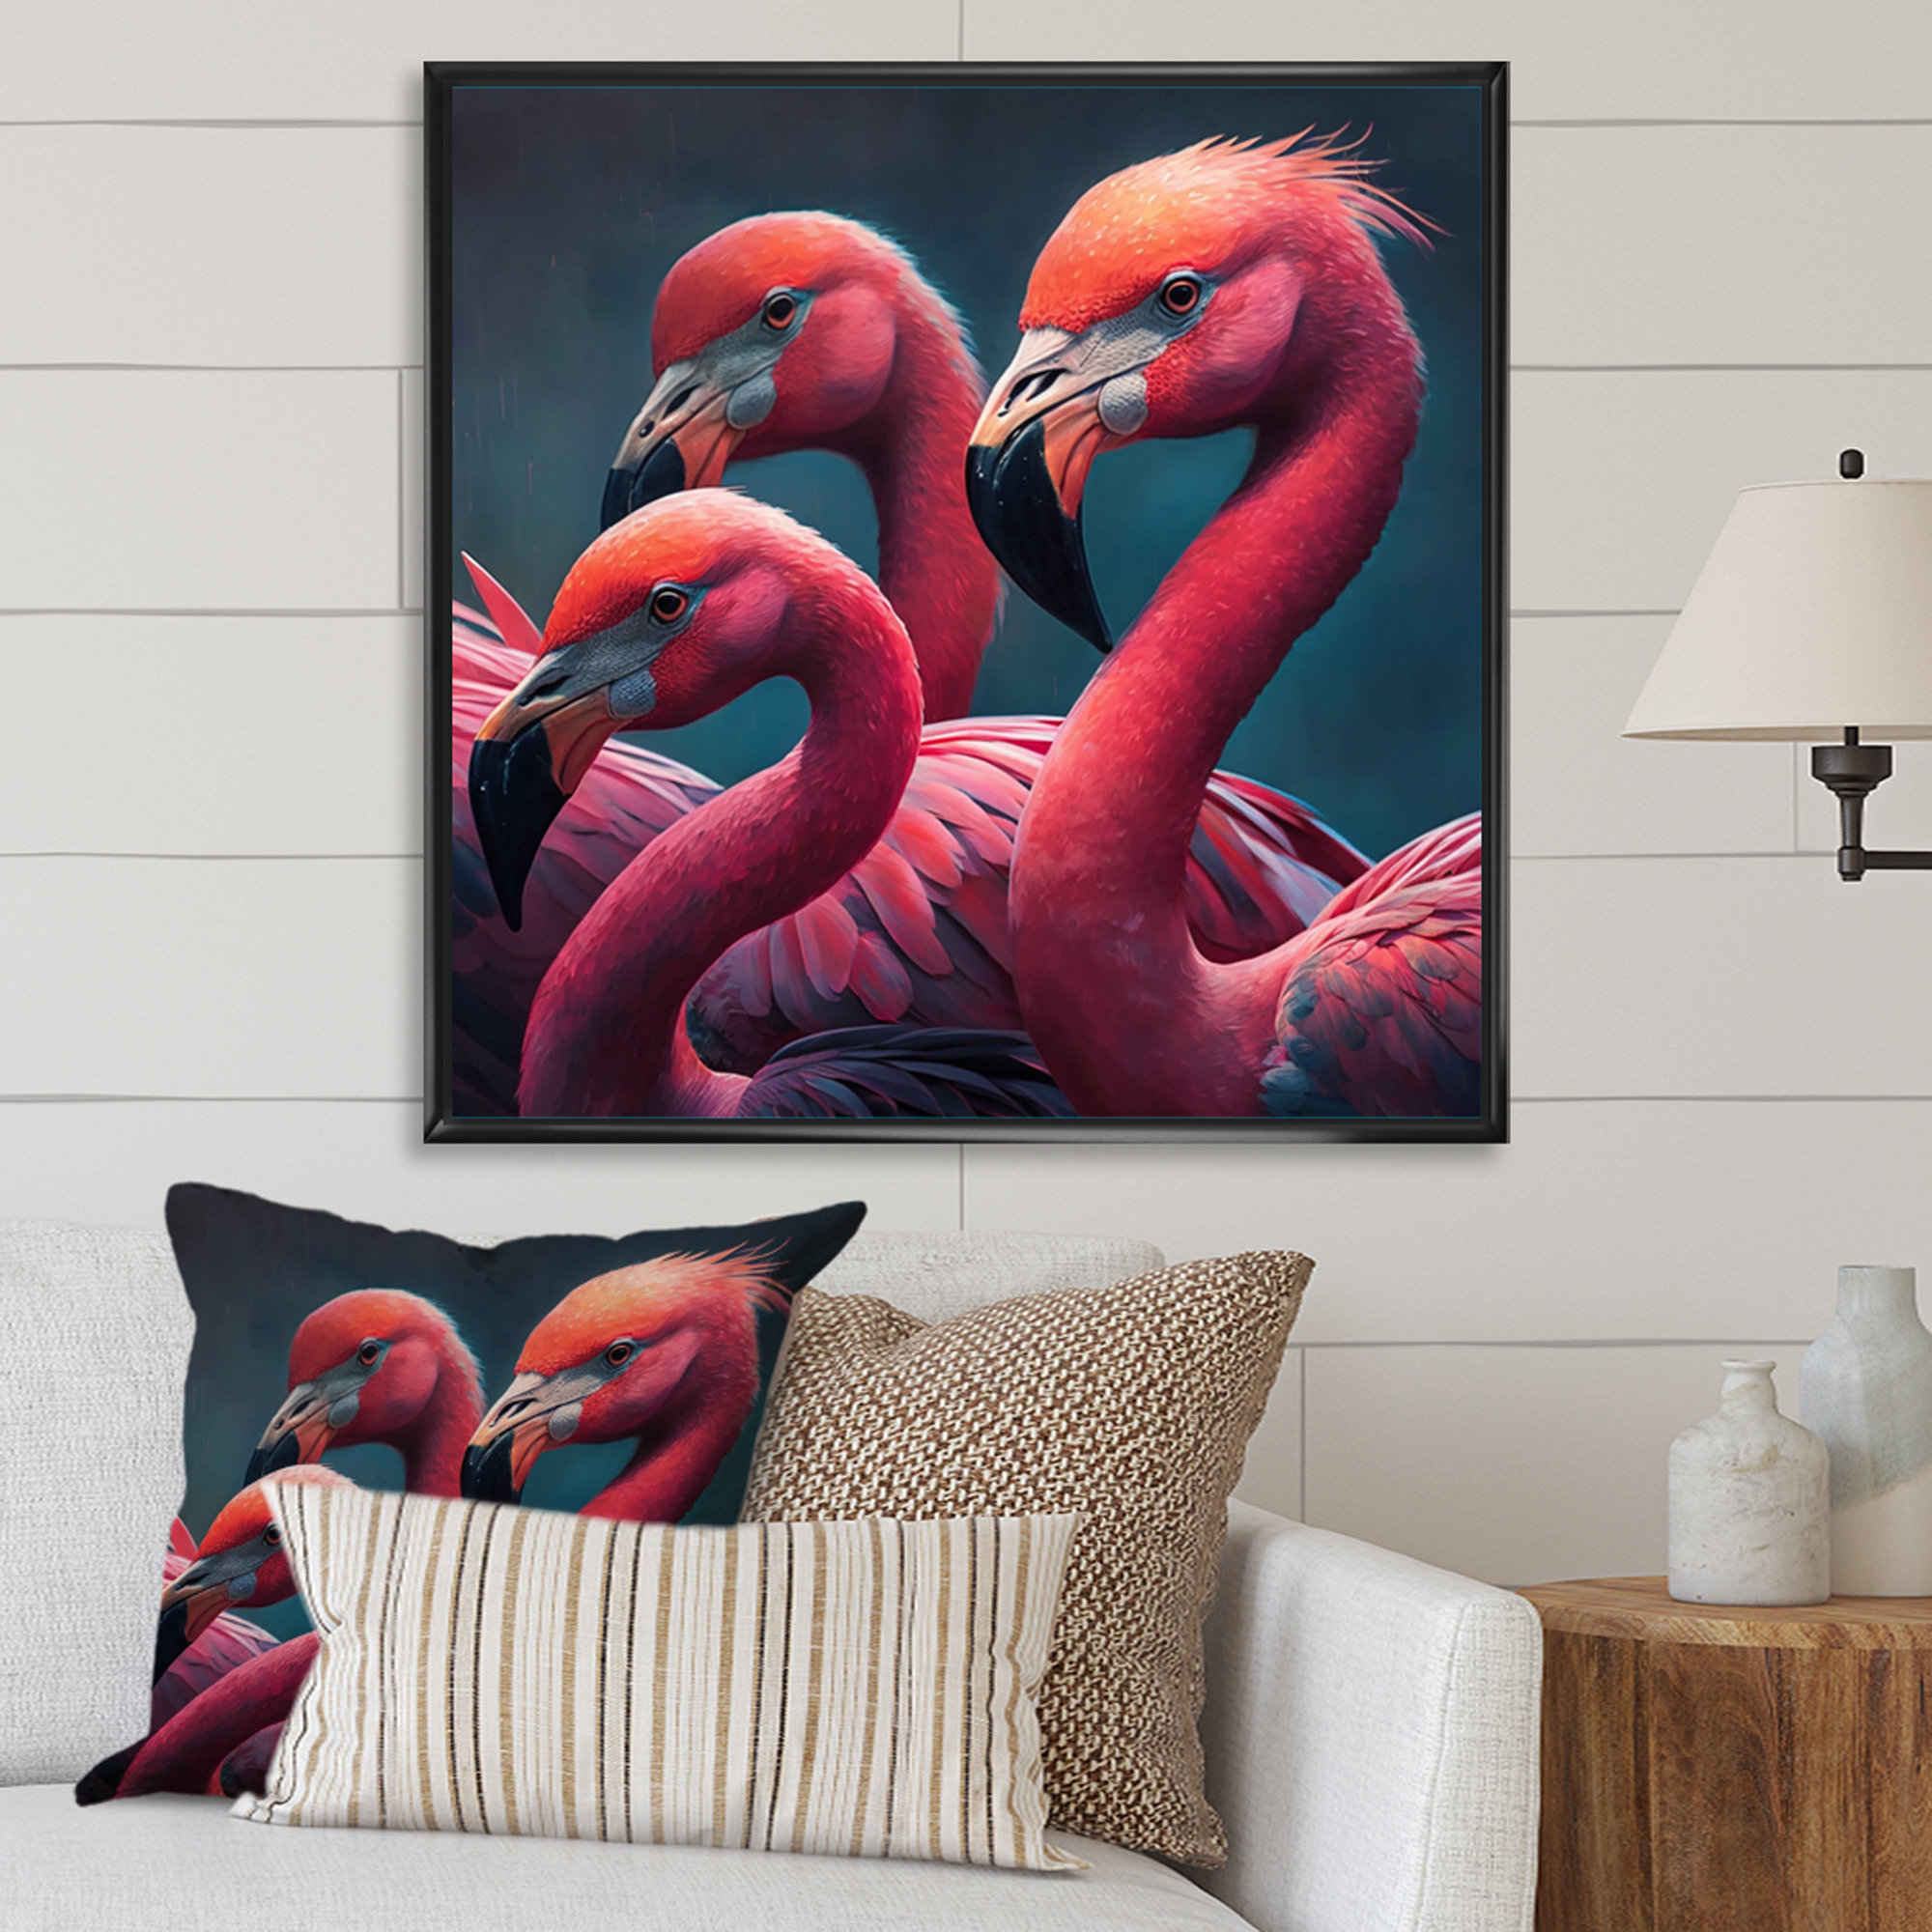 Different shades of flamingo pink feathers For sale as Framed Prints,  Photos, Wall Art and Photo Gifts